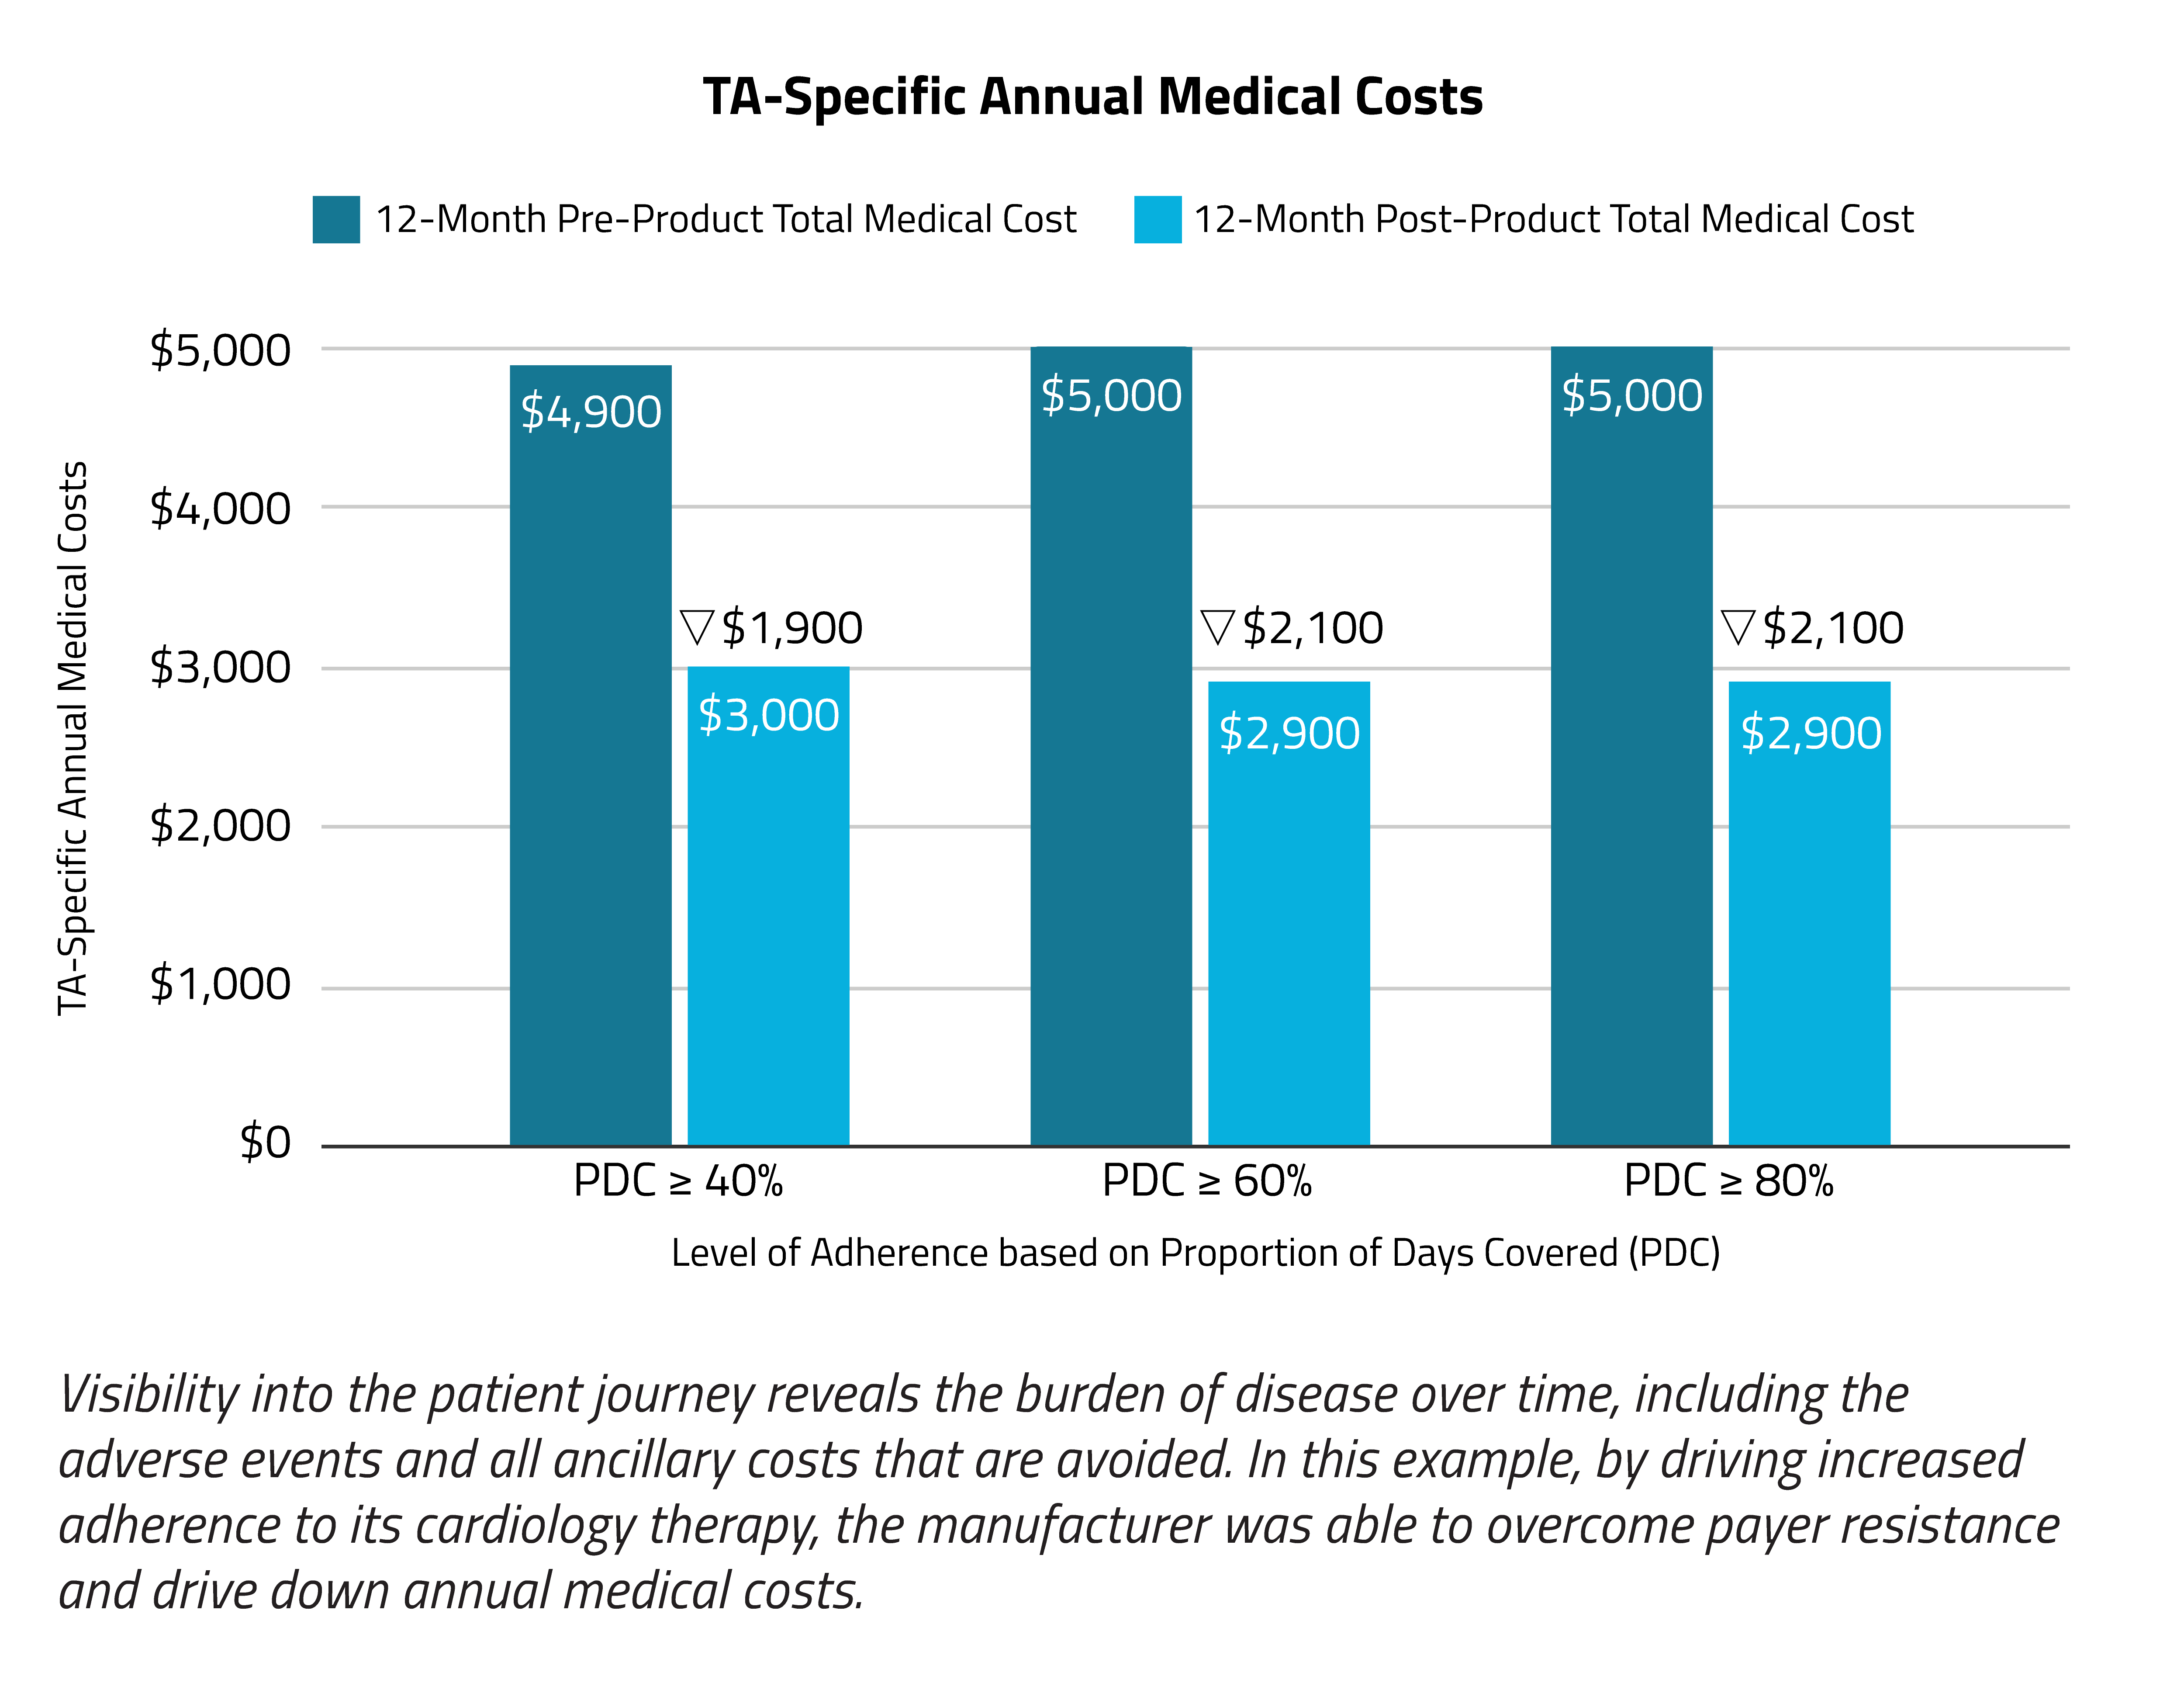 TA-Specific Annual Medical Costs